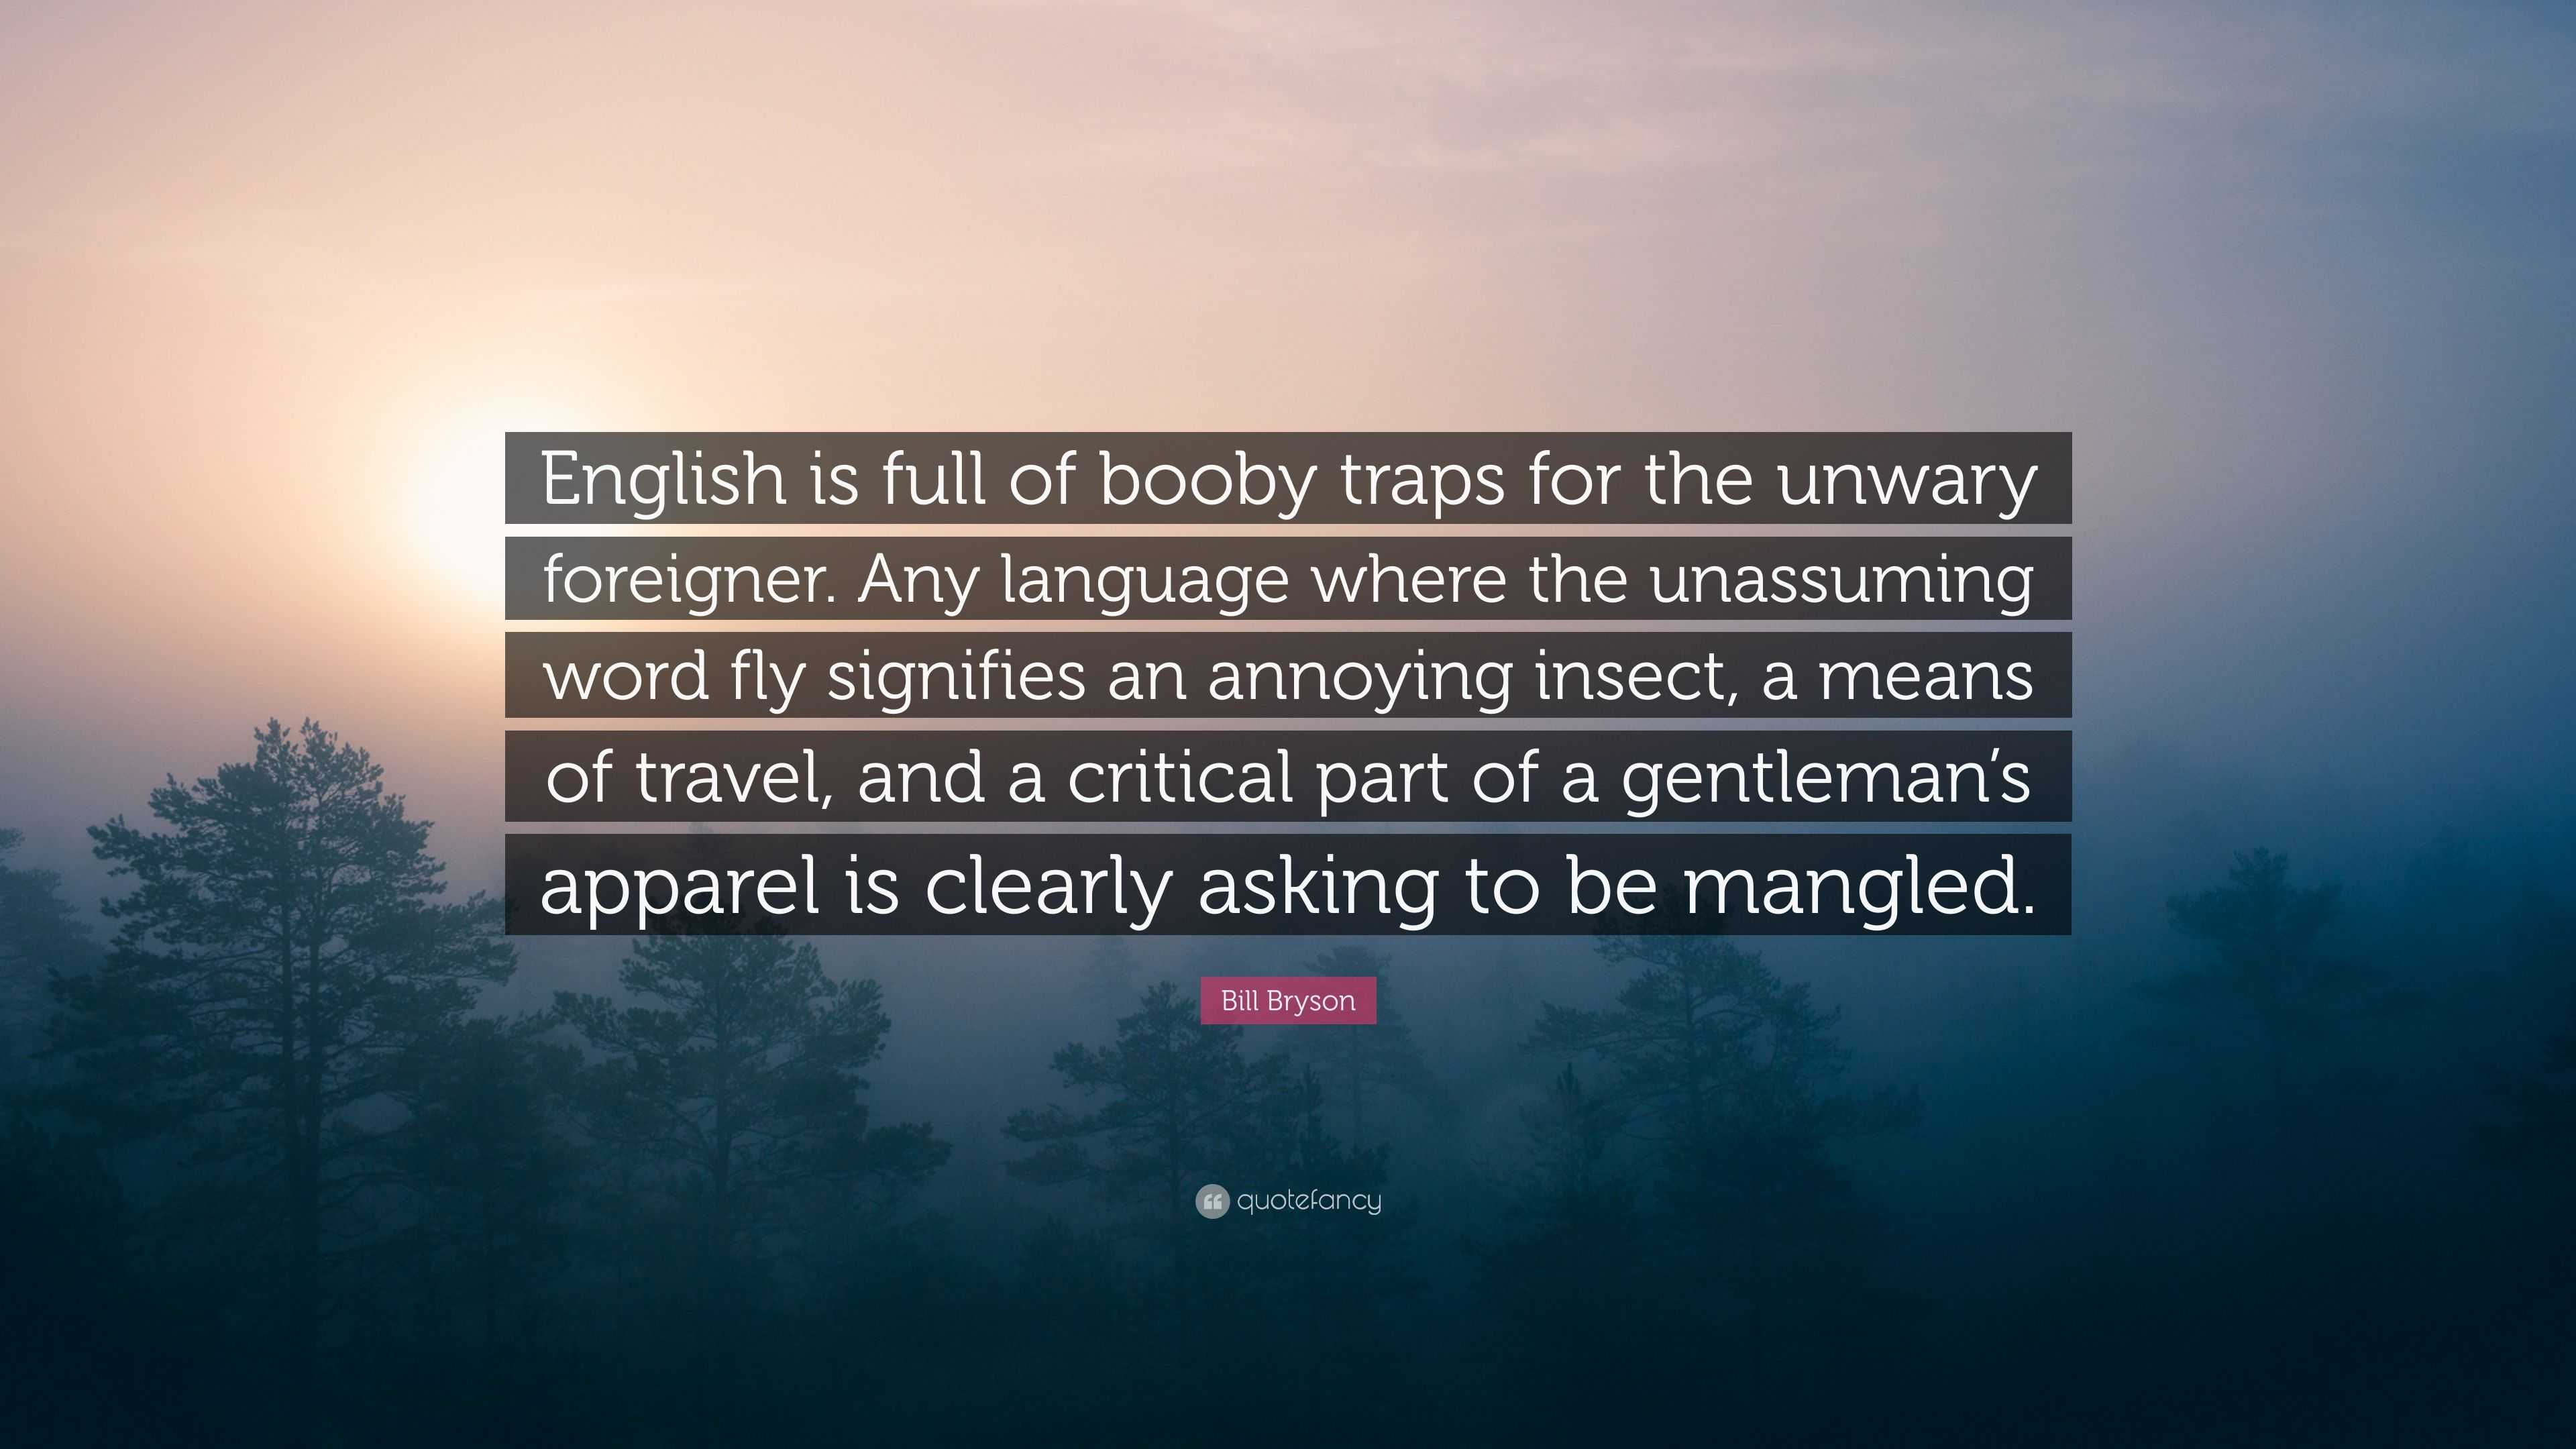 Booby Trap: The Meaning Is Not The Same As It Says